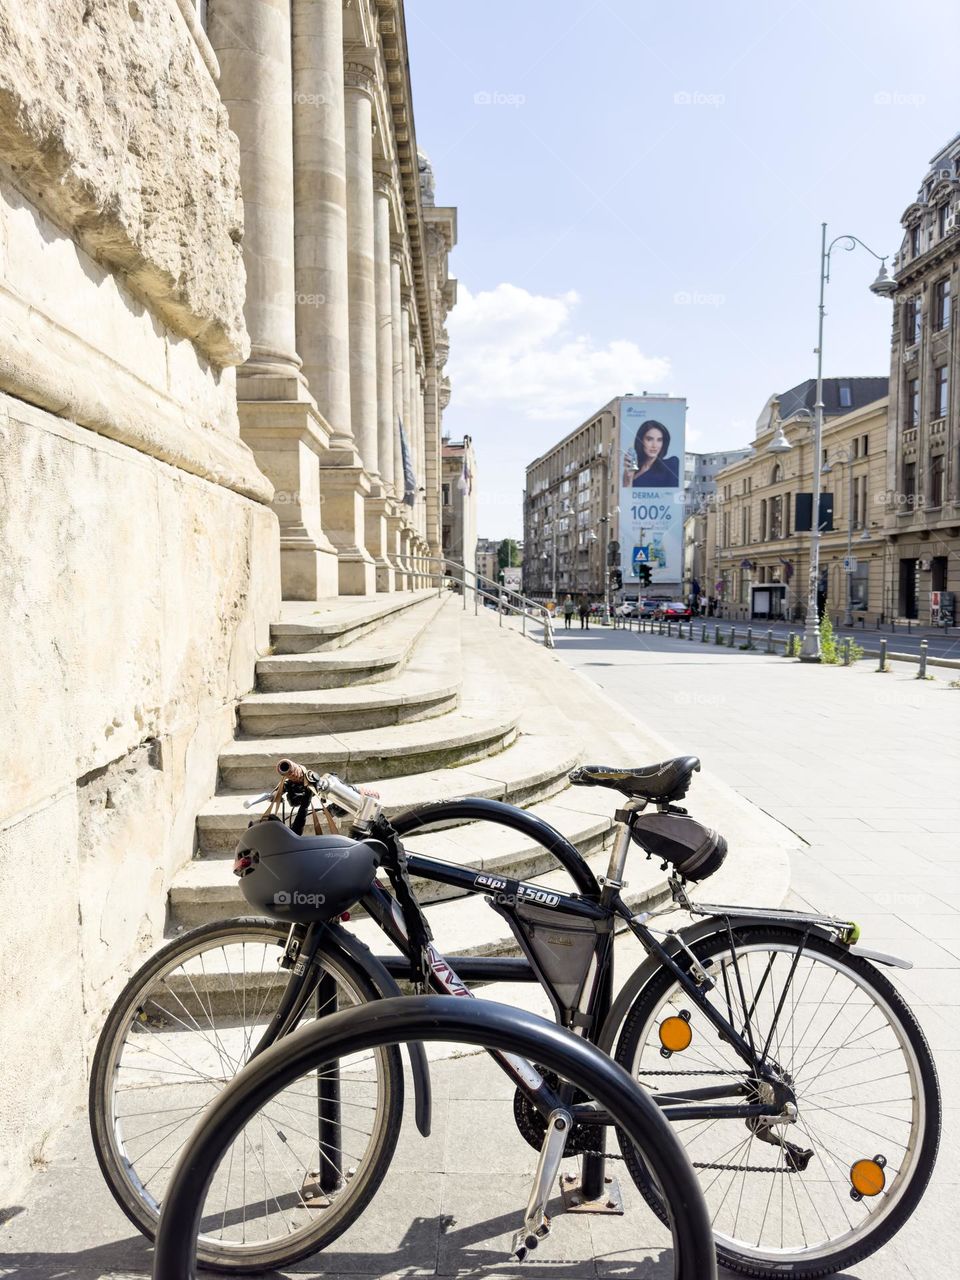 One lonely bicycle standard in the street of Bucharest 